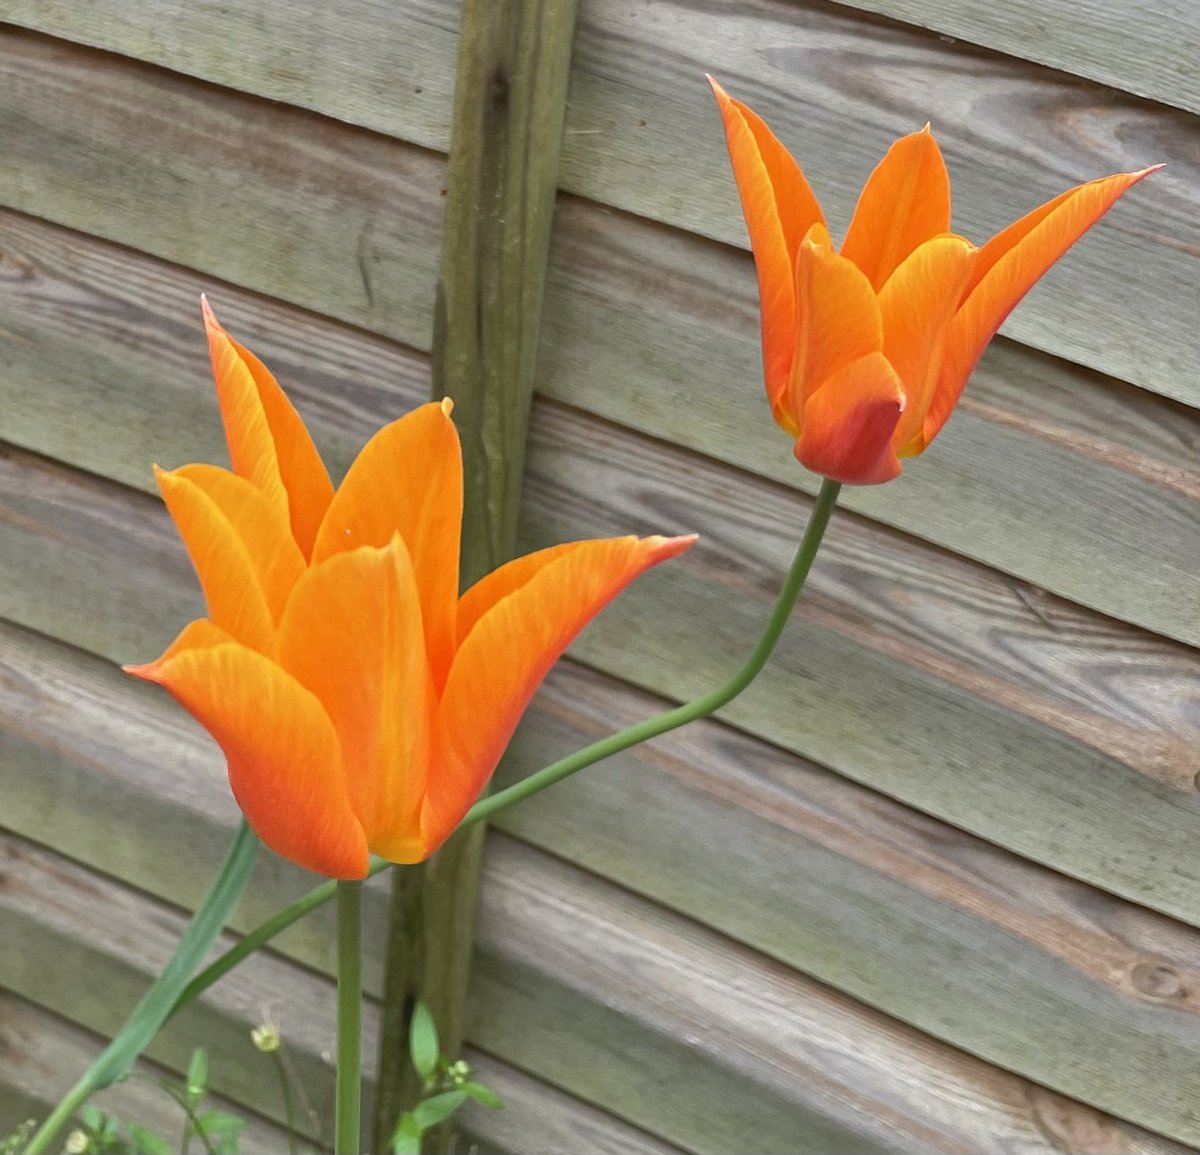 Last call for tulips! ‘Ballerina’ will always be a favourite. Planted long ago in an often neglected half barrel. Yes, I’m feeling guilty! We have sunshine 😎 hope you all do too! Have a good day, take care, stay safe. #tuliptuesday #GardeningTwitter @loujnicholls @kgimson